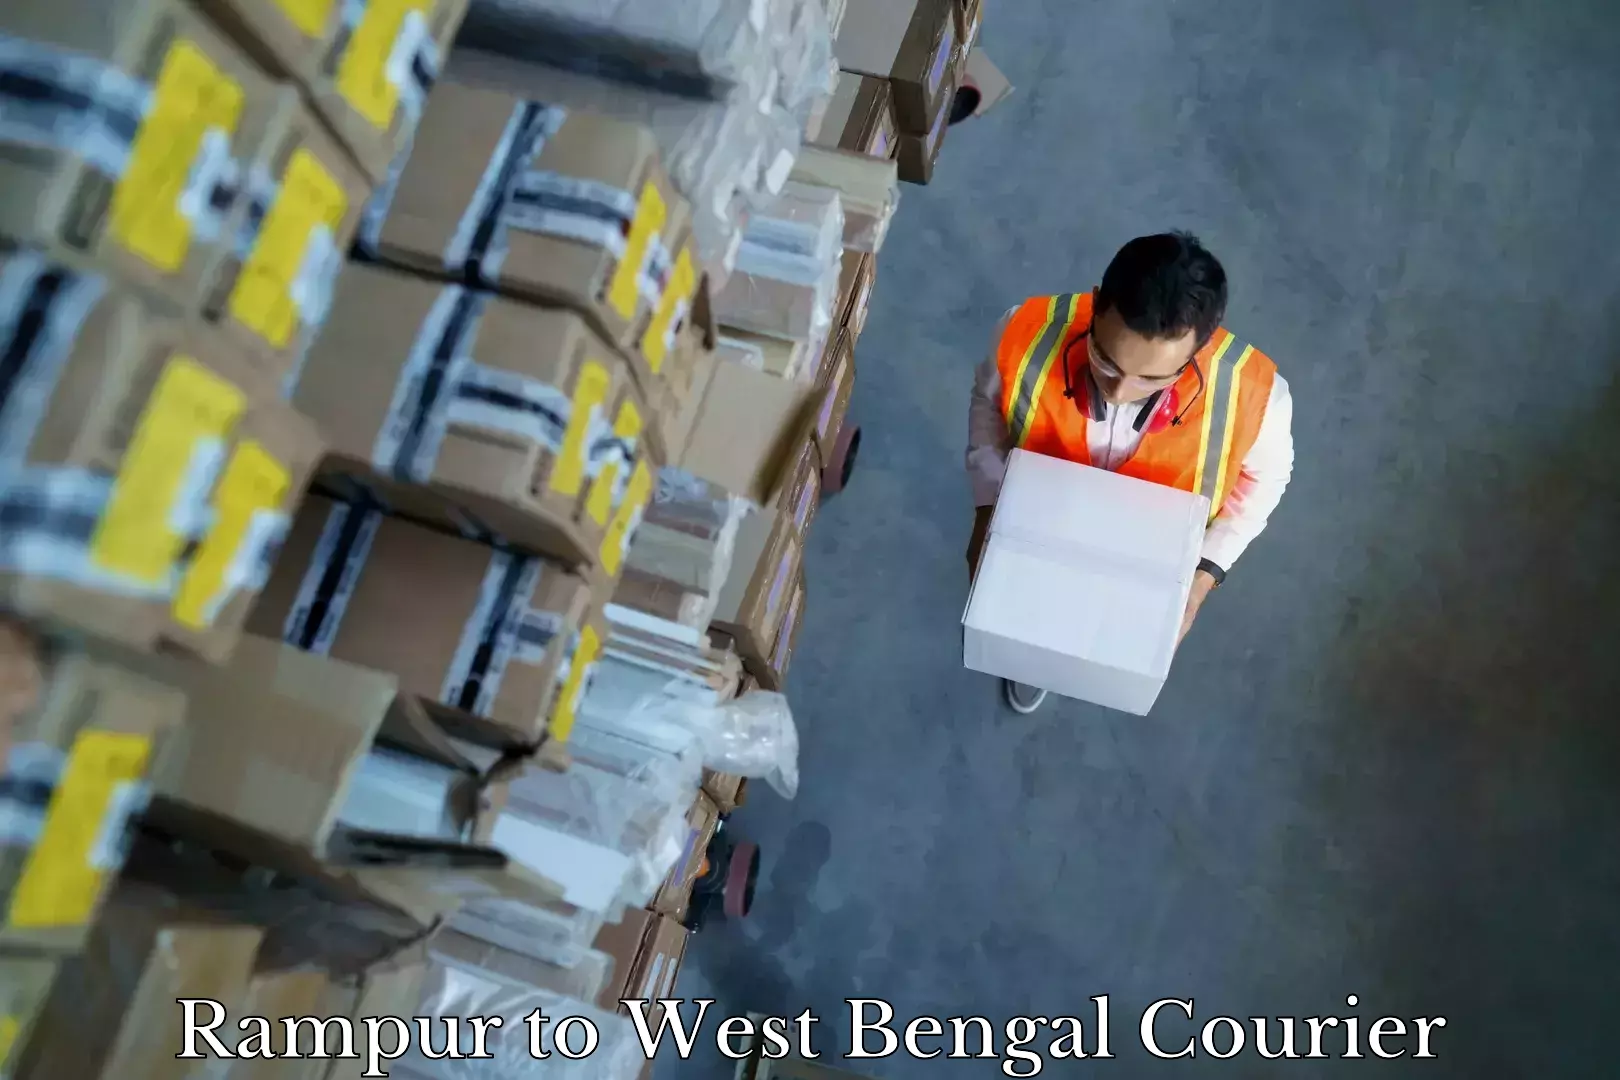 Furniture moving specialists Rampur to West Bengal